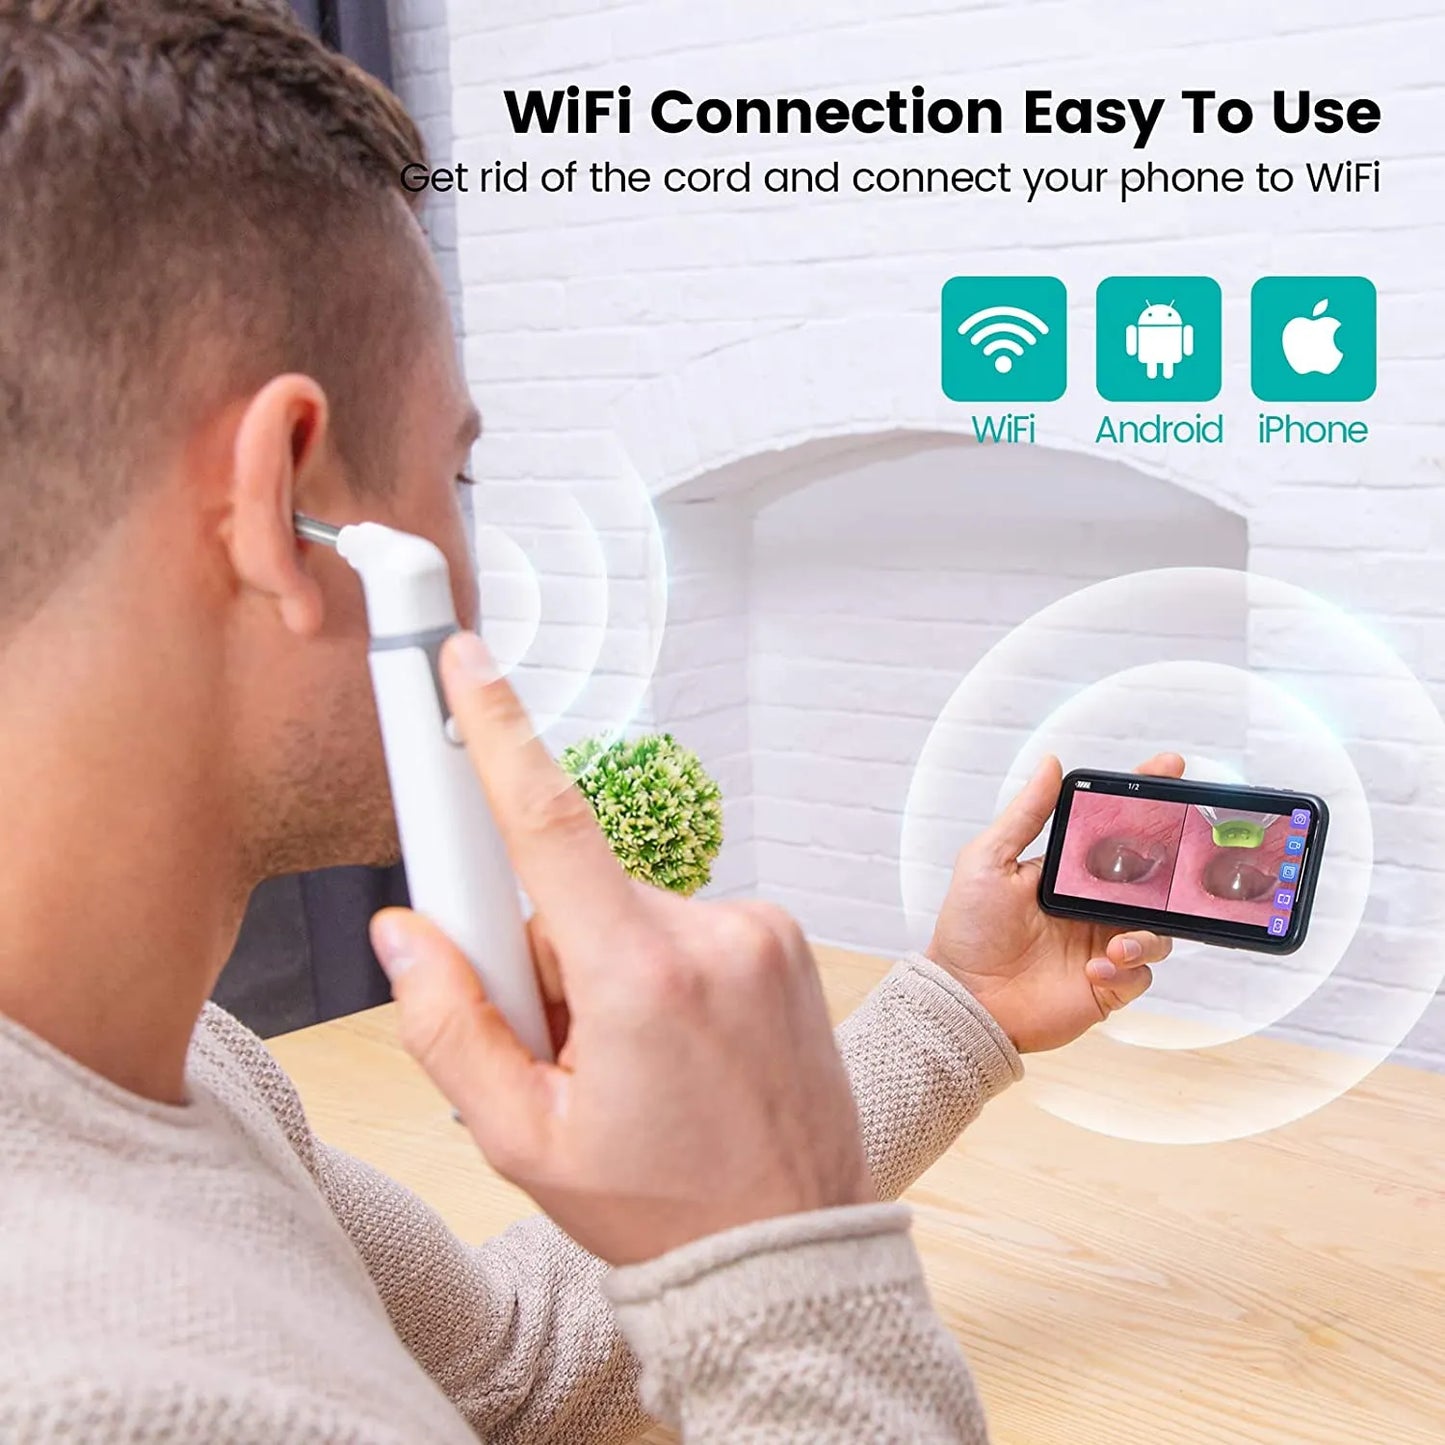 Explore Your Ears with the 3.9mm Wireless Otoscope Ear Camera - 720P HD WiFi Ear Scope with 6 LED, Perfect for Kids and Adults on Android and iPhone